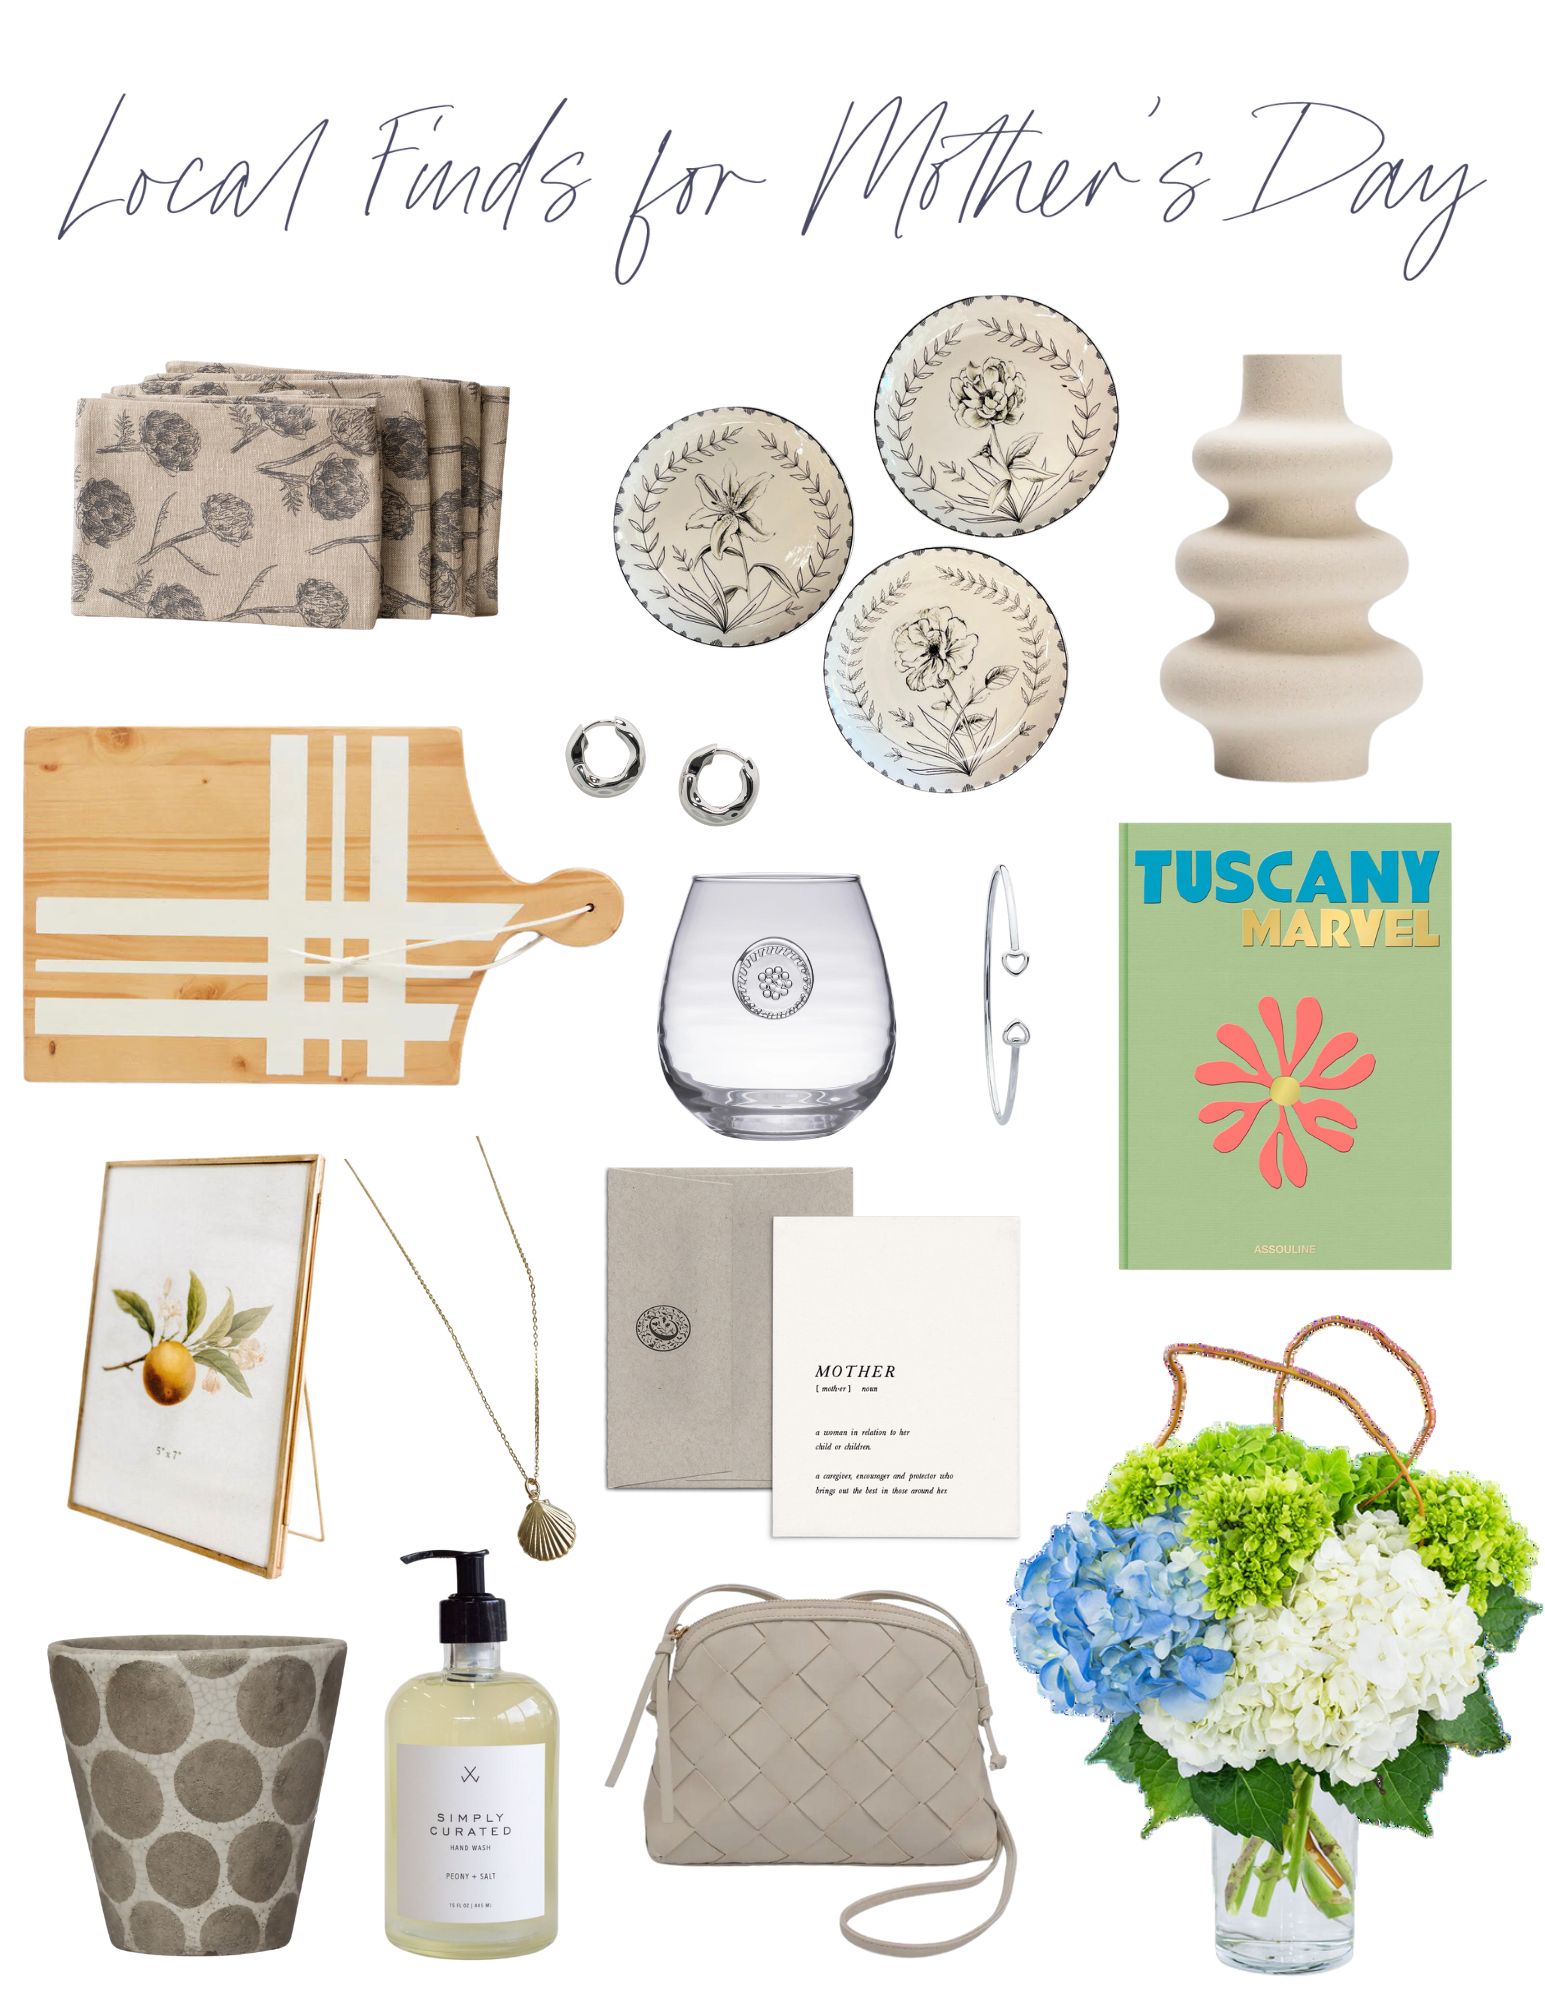 DIY Mother's Day Gift Ideas  Goodwill - Southern Piedmont